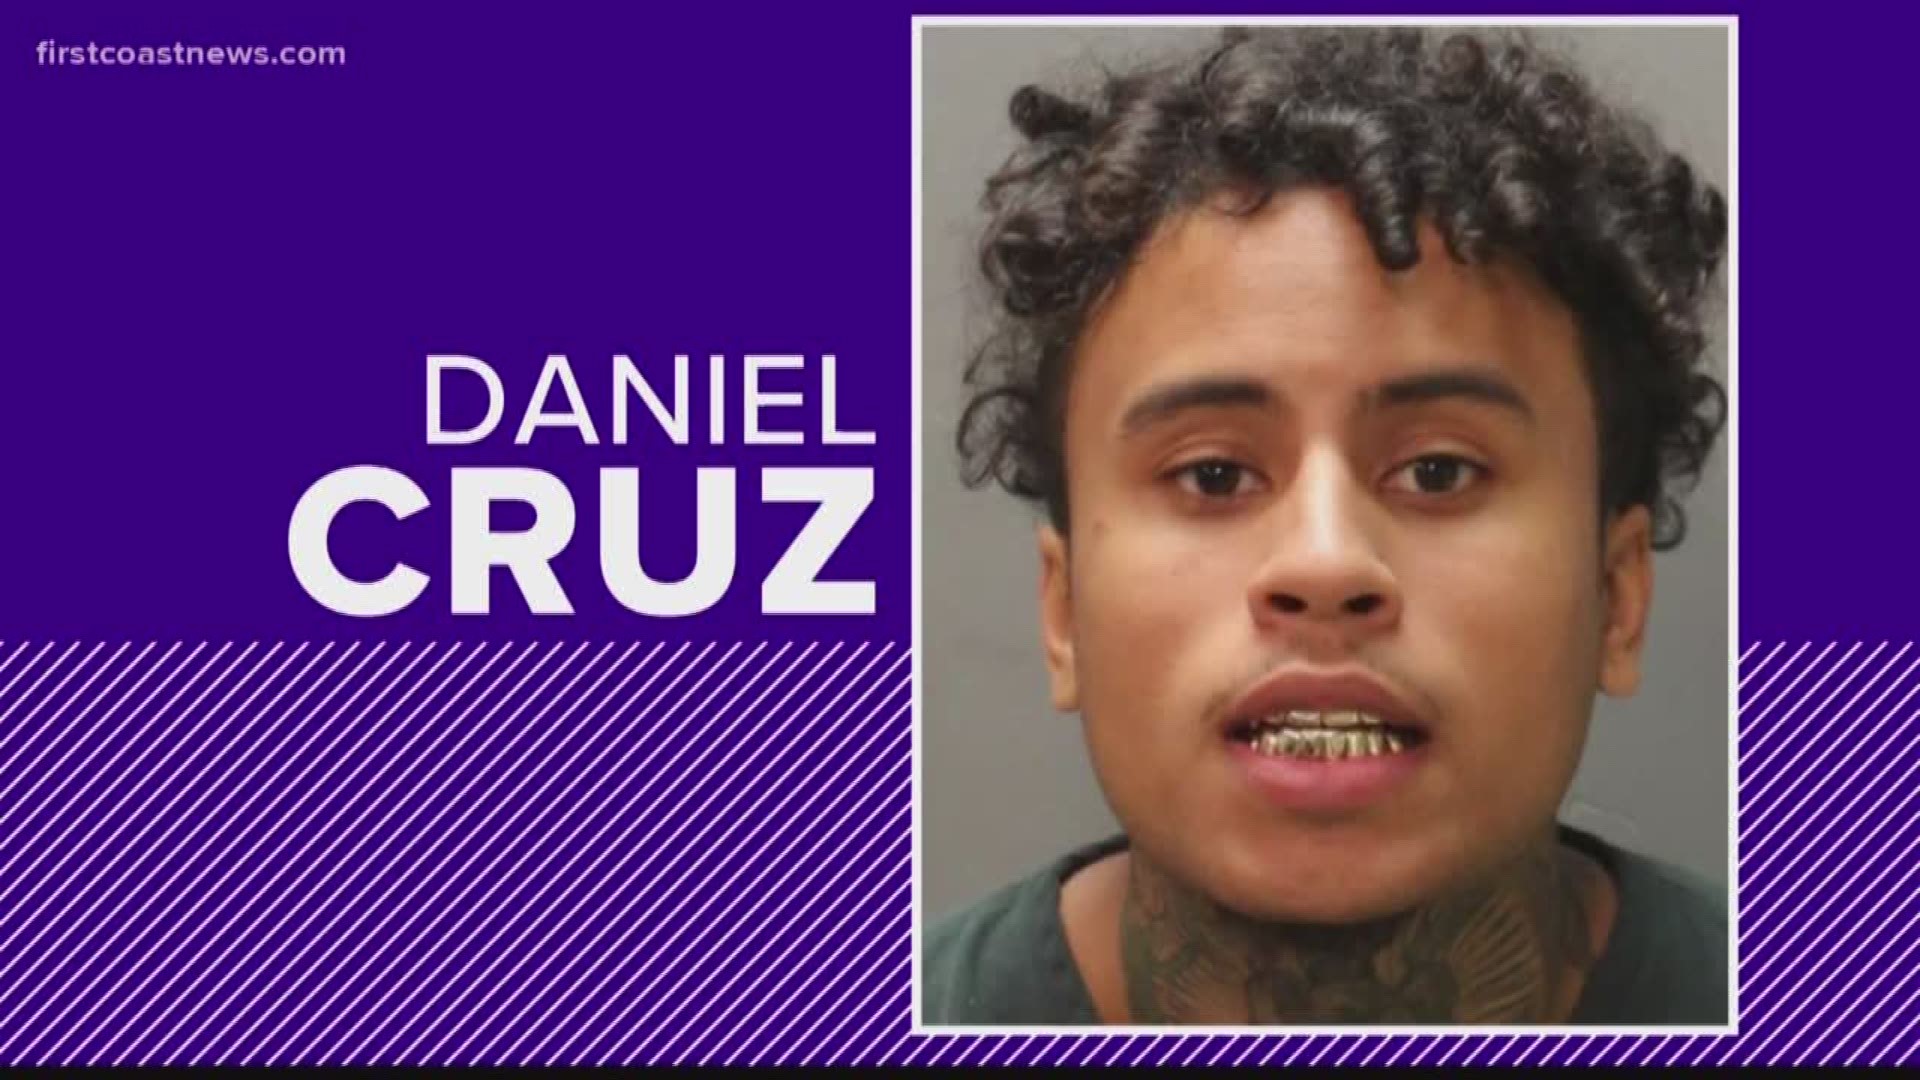 Daniel Cruz is accused of abducting a woman at gunpoint from her Arlington home.